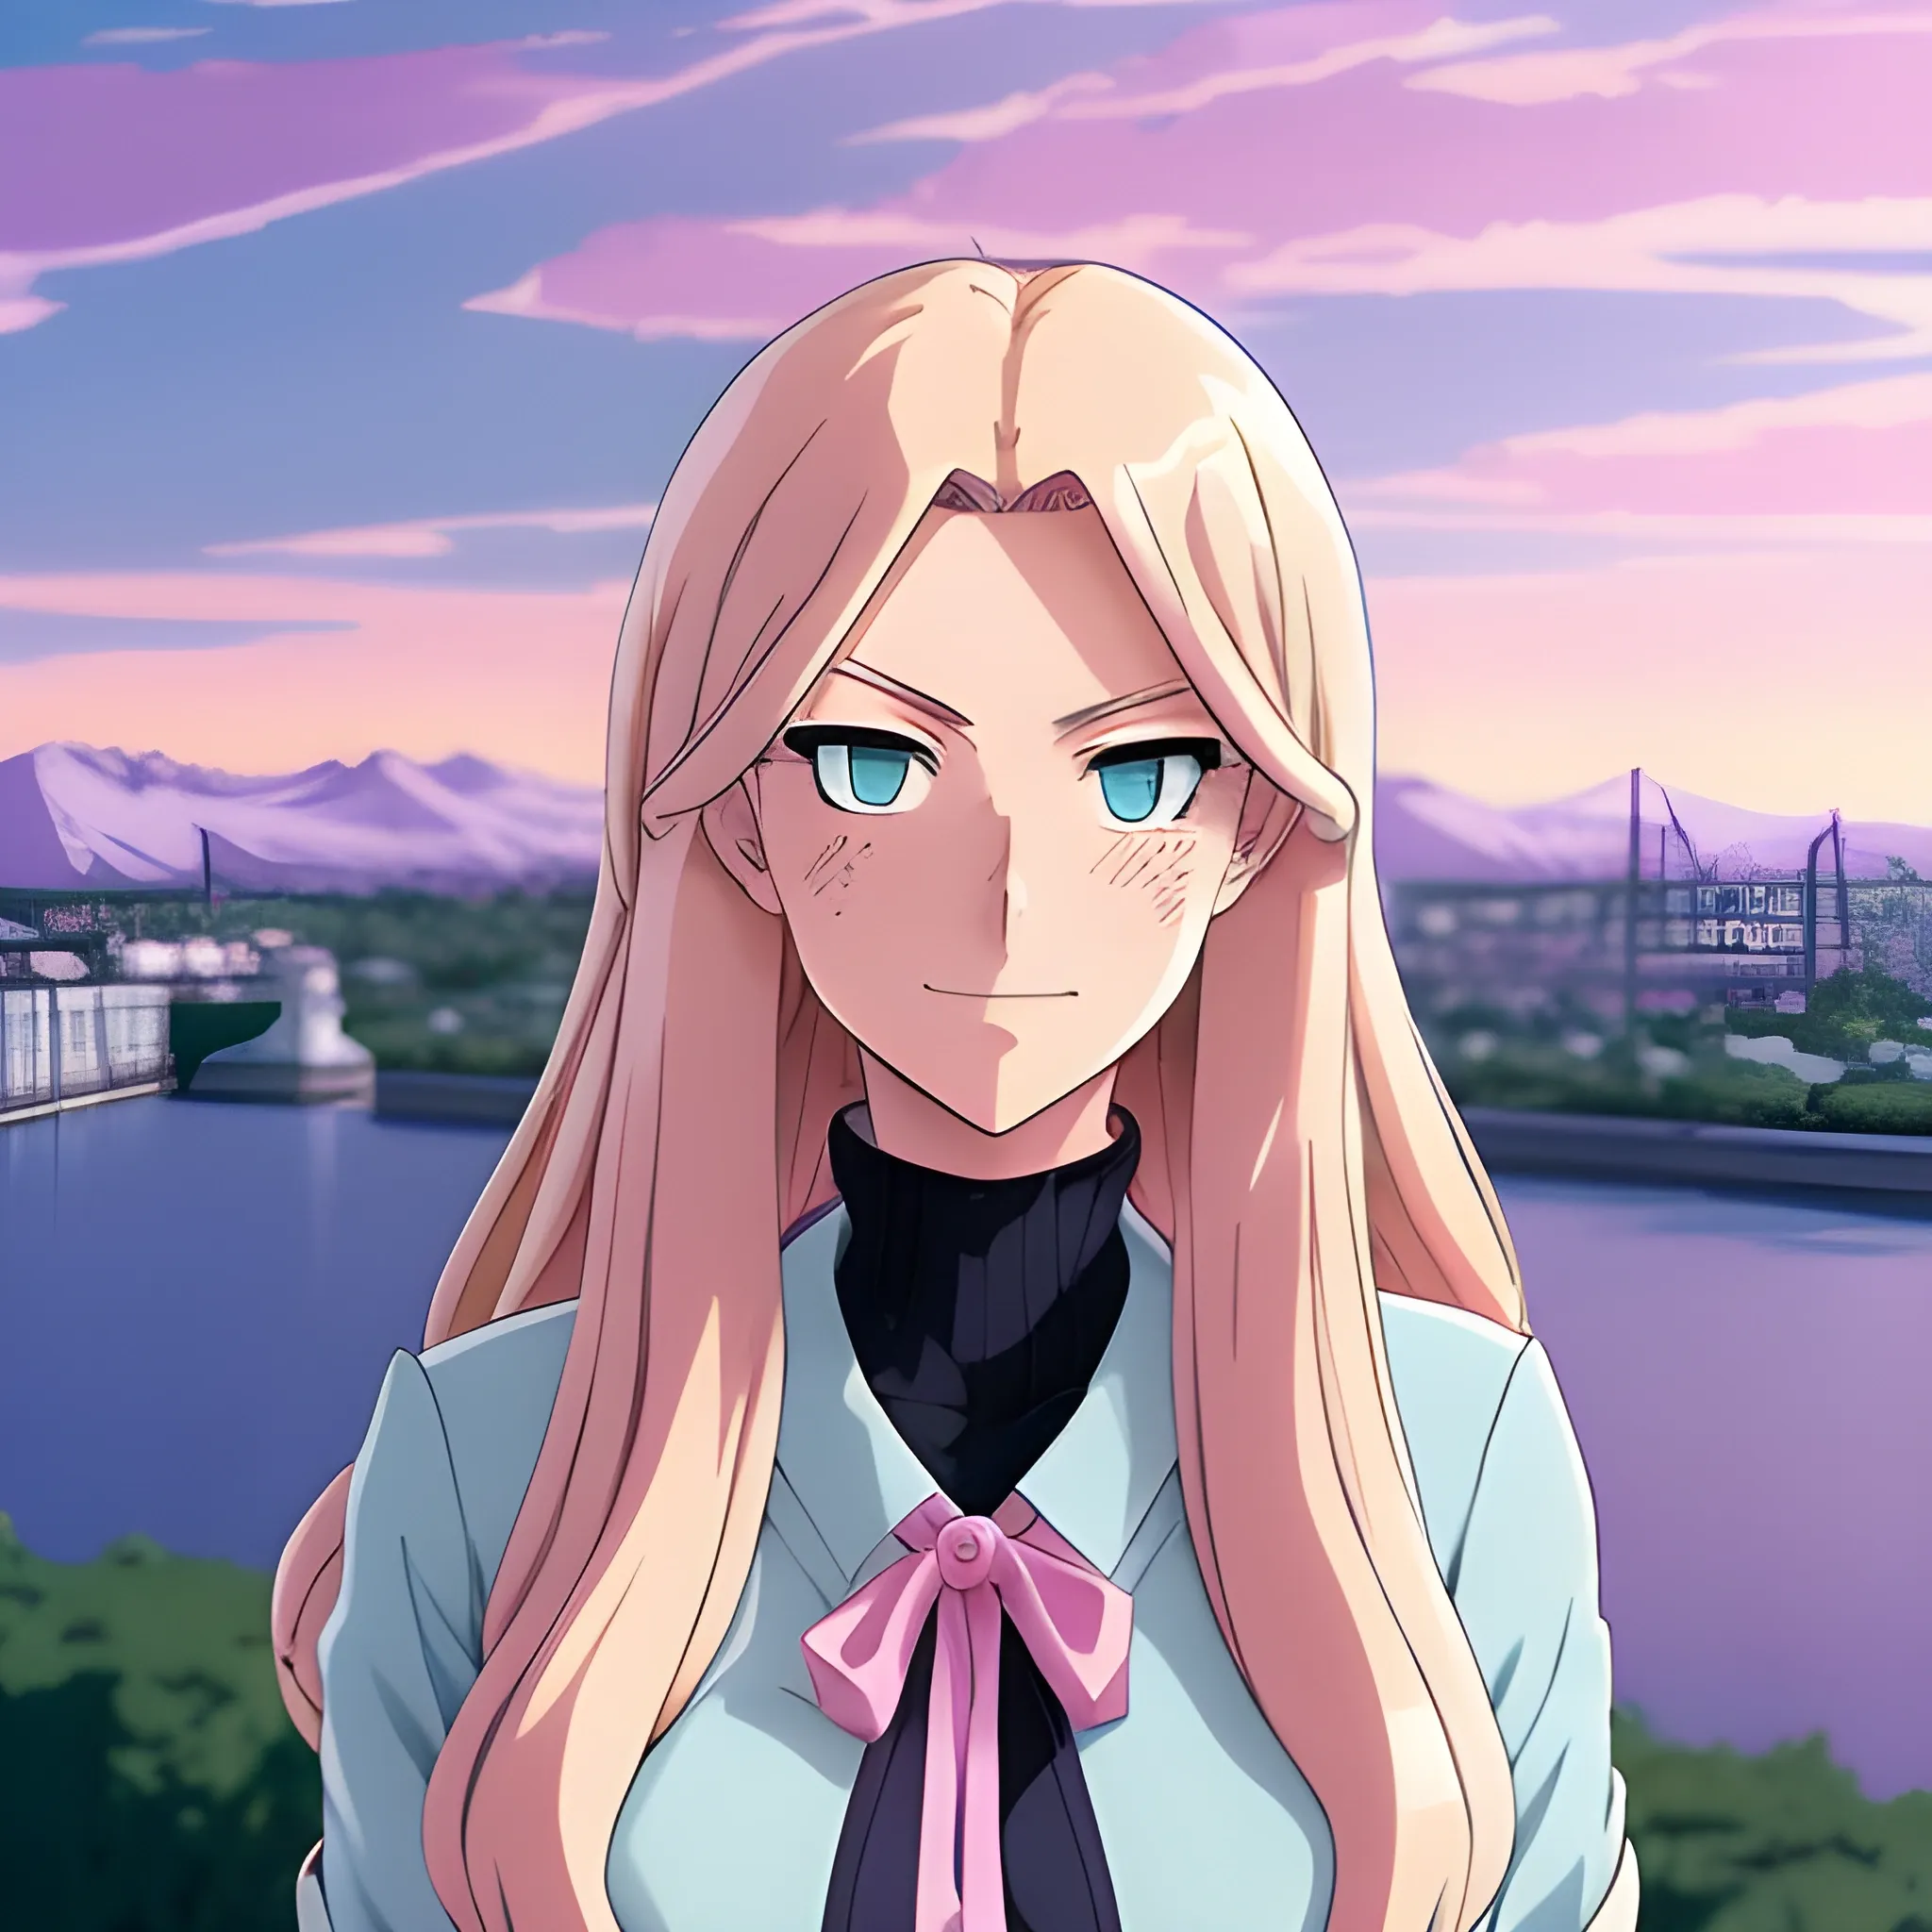 young girl who looks like at Sanni McCandless, , blond semi-long hair, blue eyes, a slightly sad look, highly detailed, my hero academia anime, her clothing style is soft pink coquette but somewhat revealing, a magic sky in background